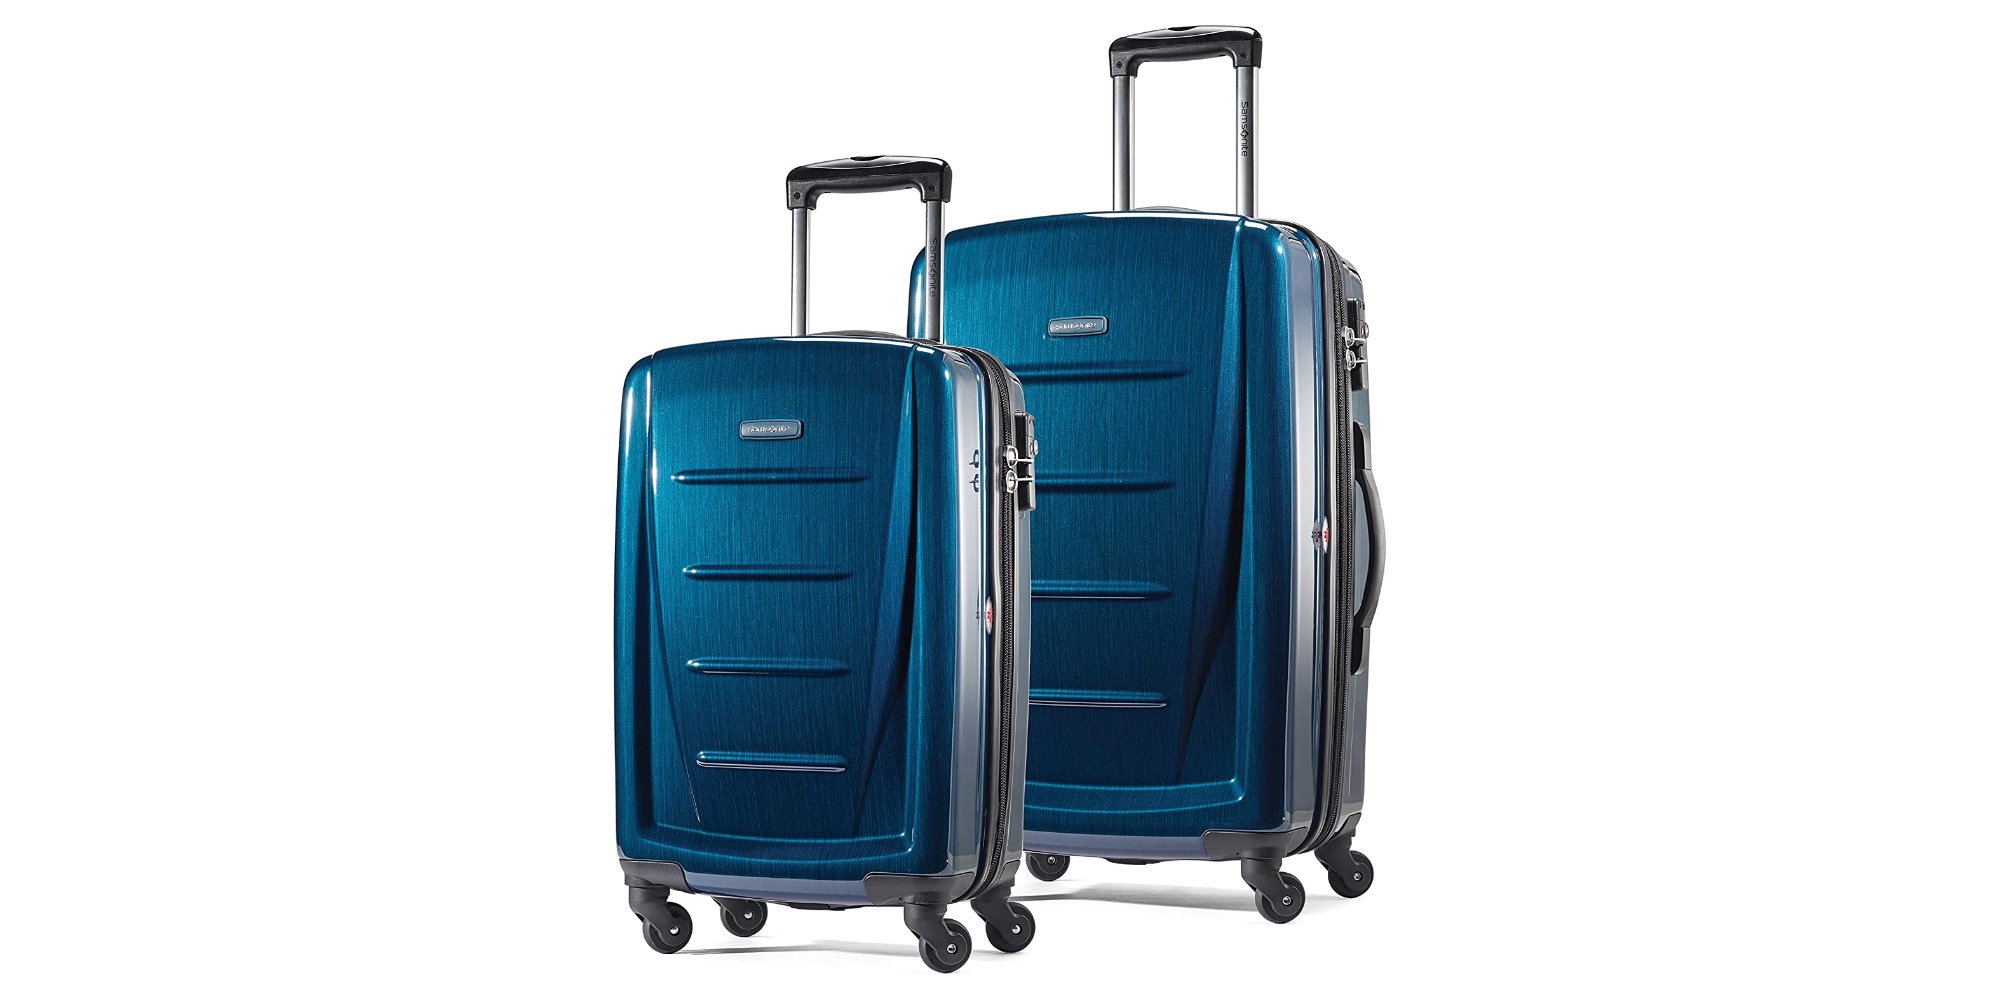 score-some-new-luggage-with-up-to-50-off-samsonite-sets-and-more-from-56